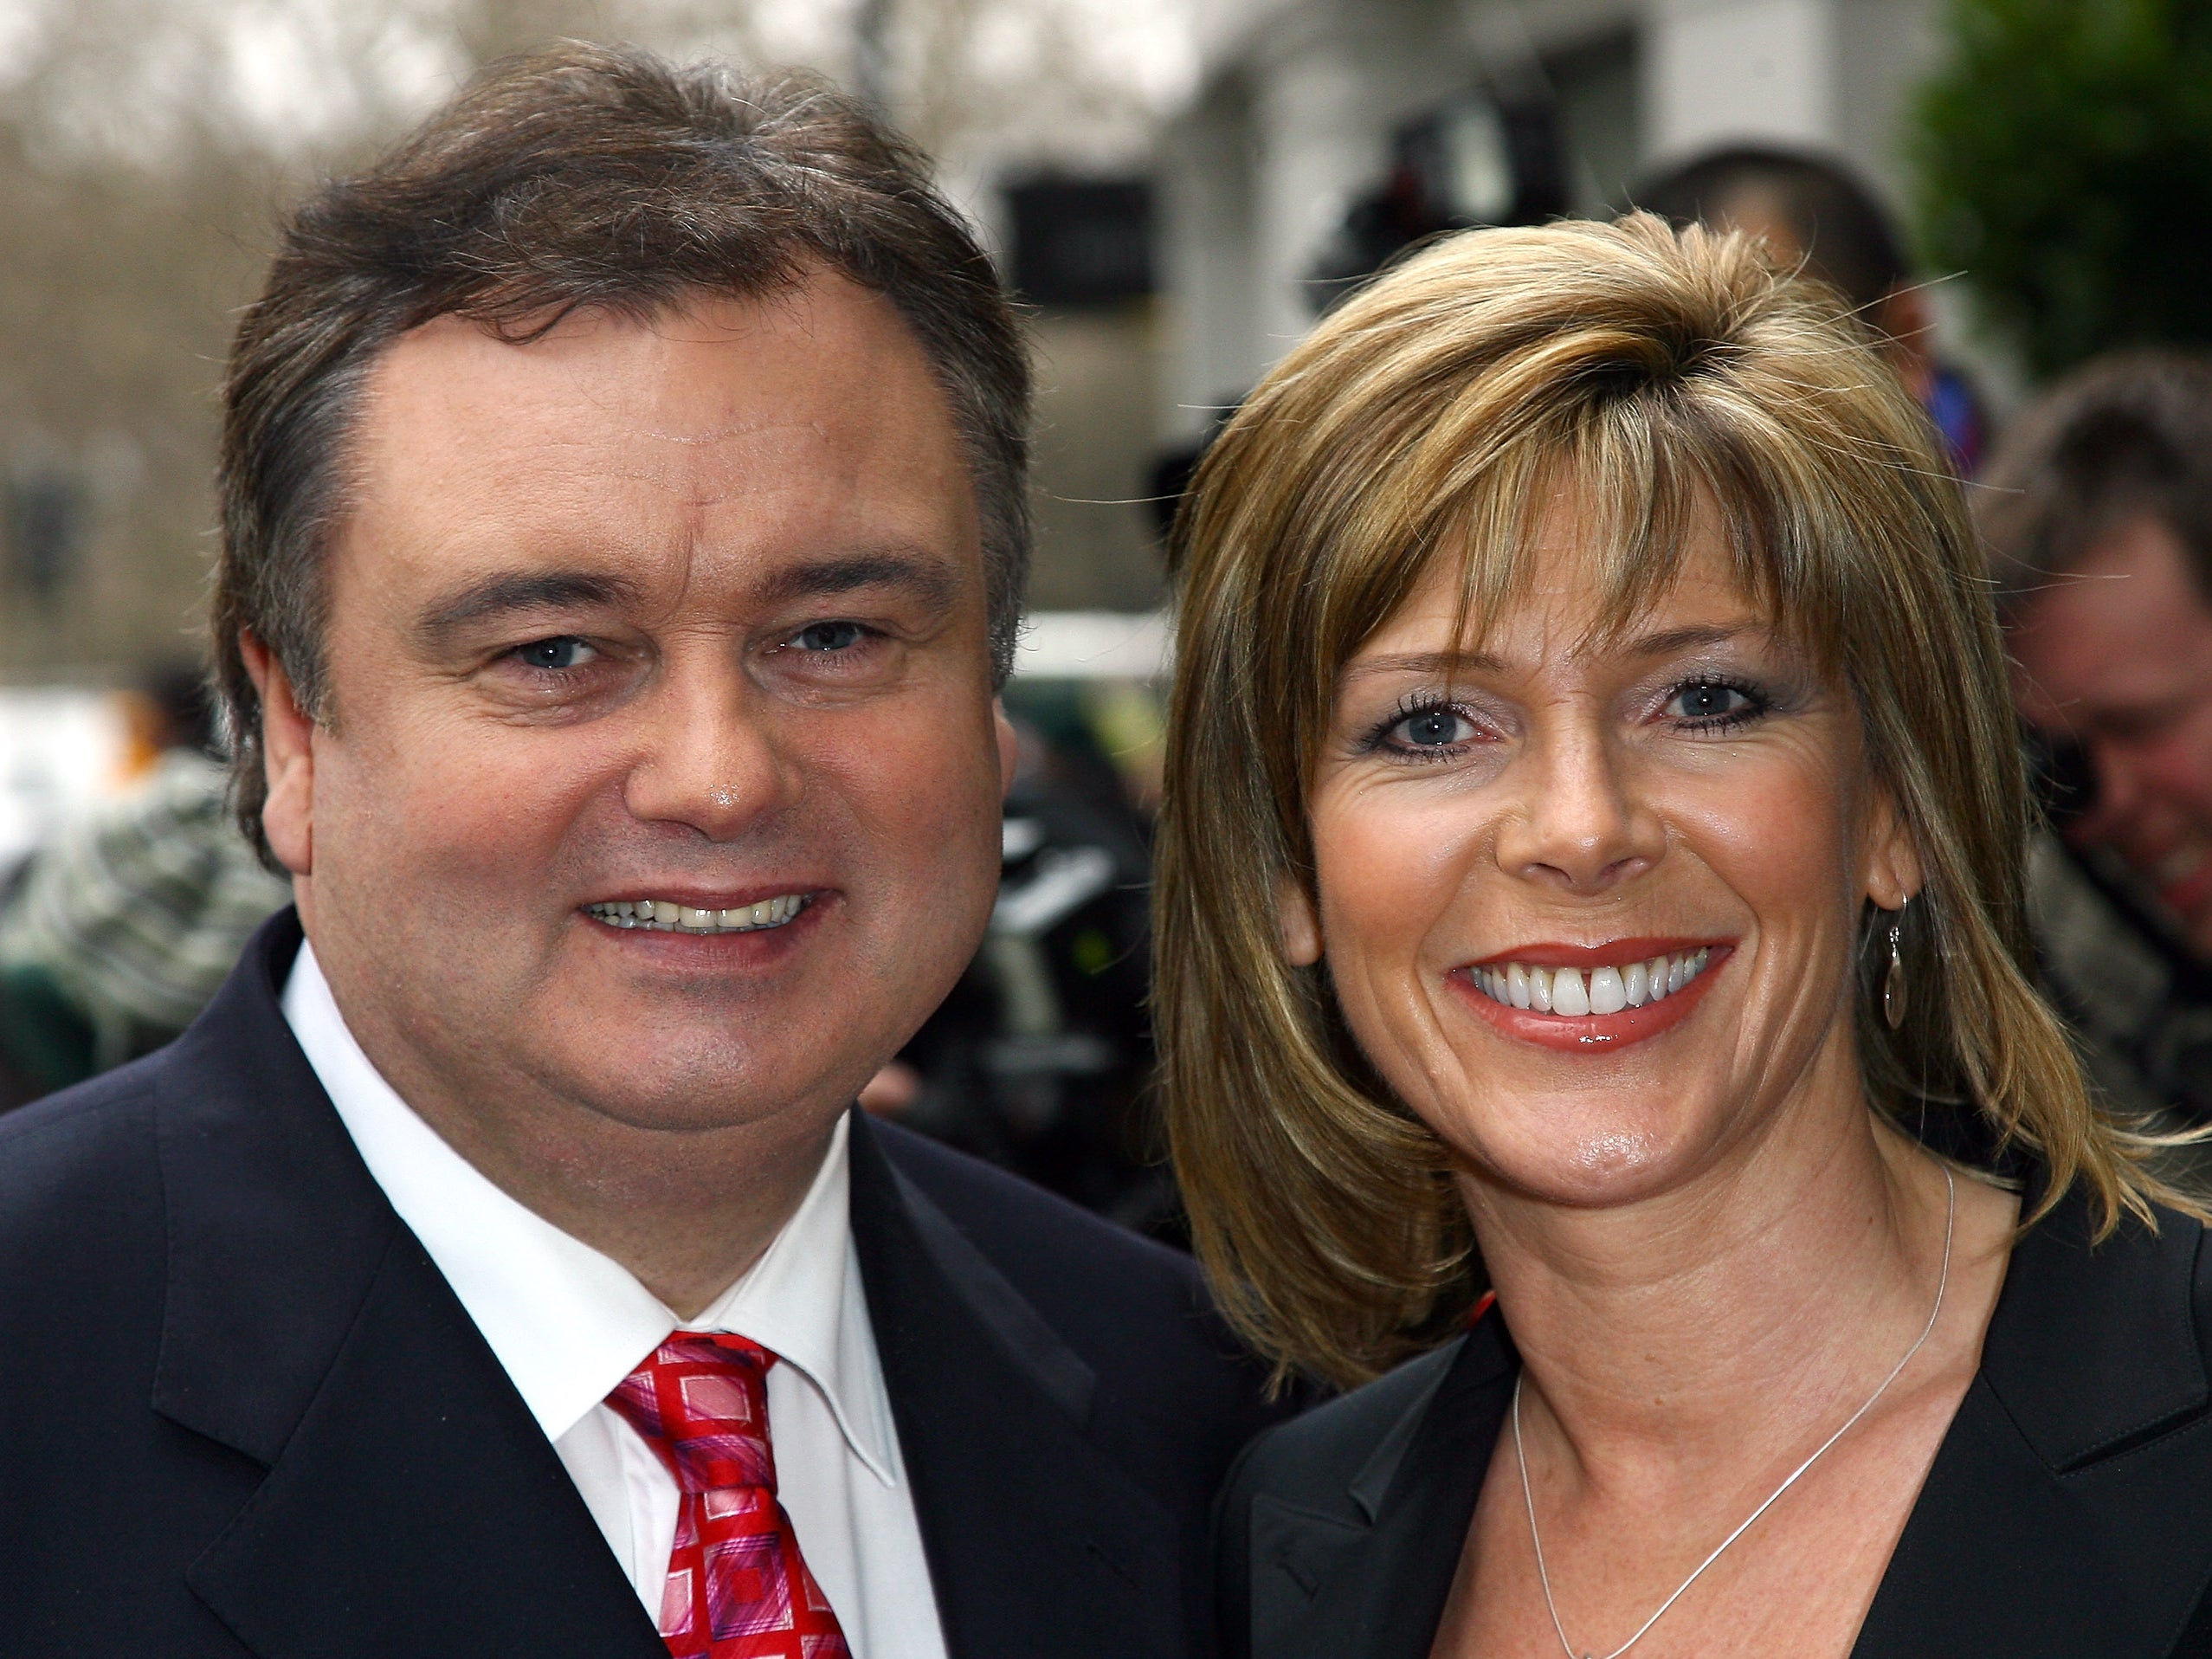 Eamonn Holmes and Ruth Langsford, pictured in 2008